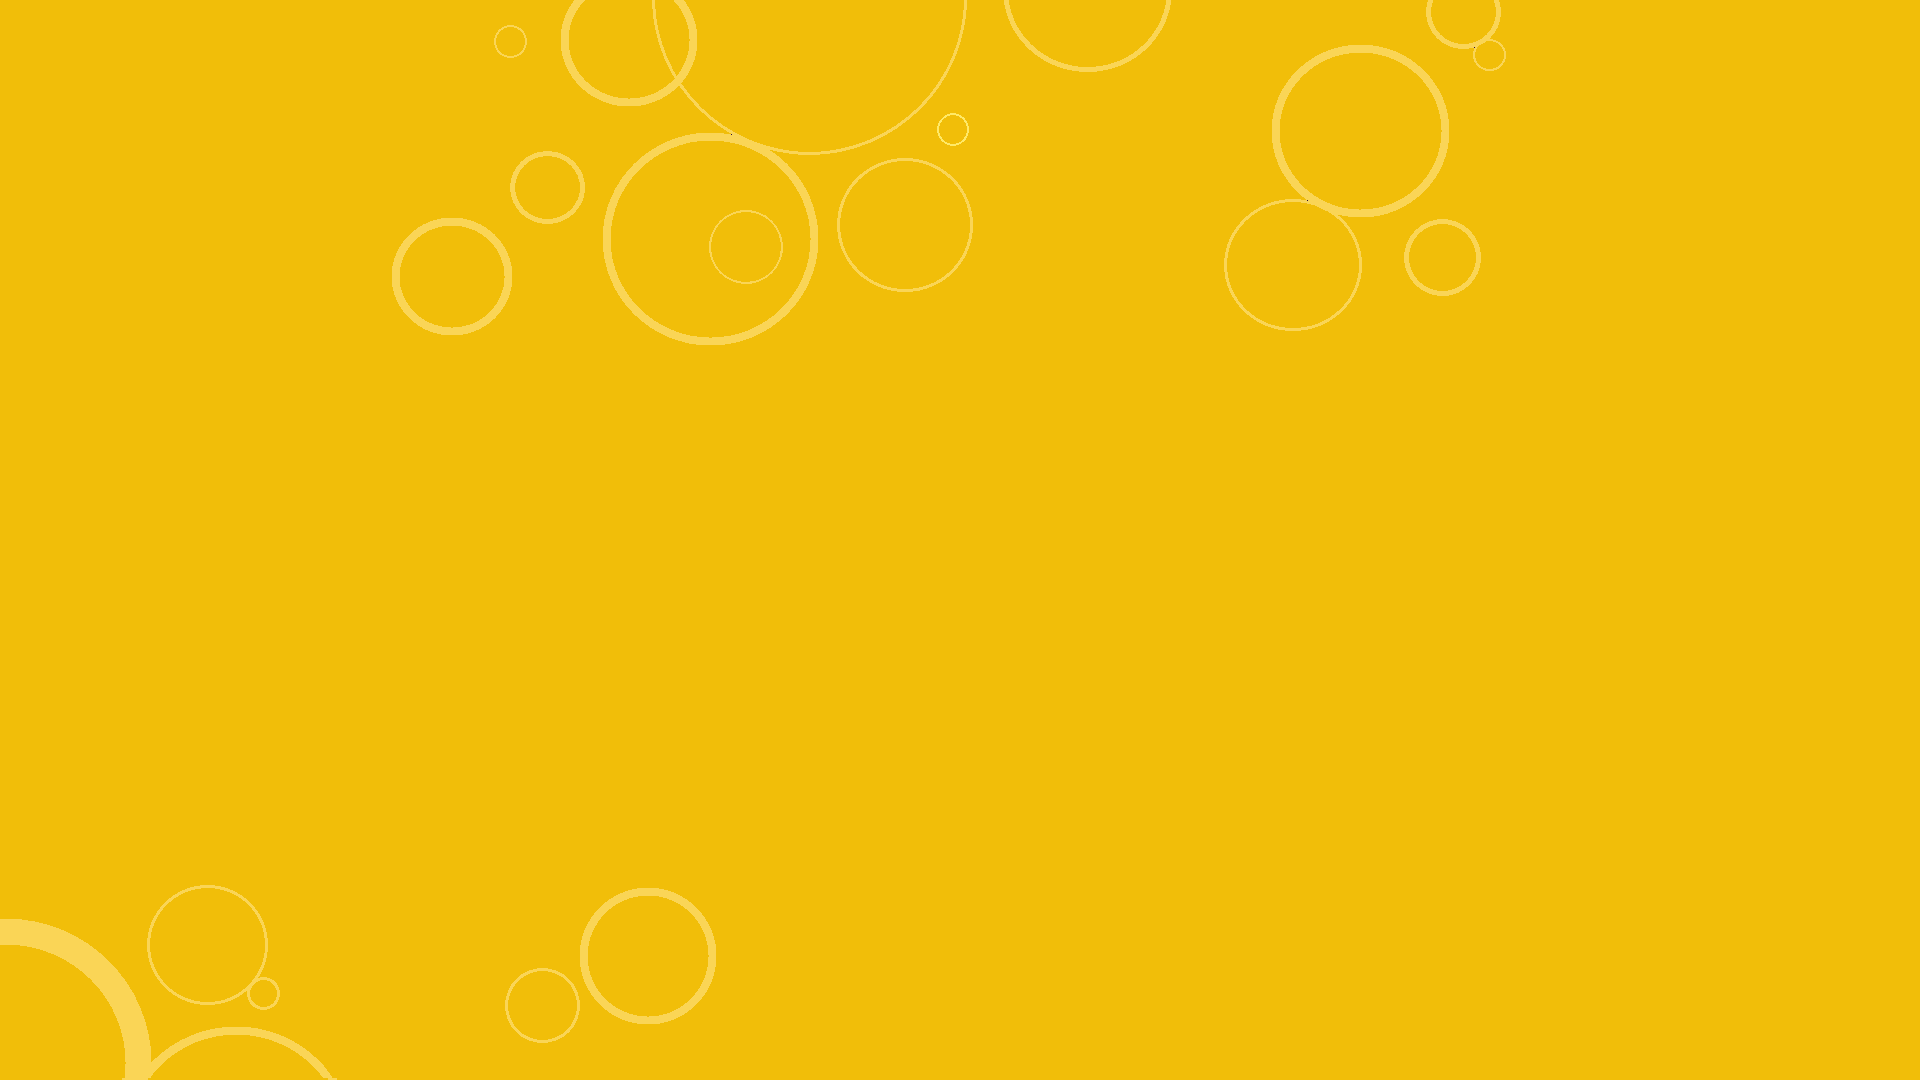 White Bubbles On Yellow Background Wallpaper H 5659 Wallpaper High